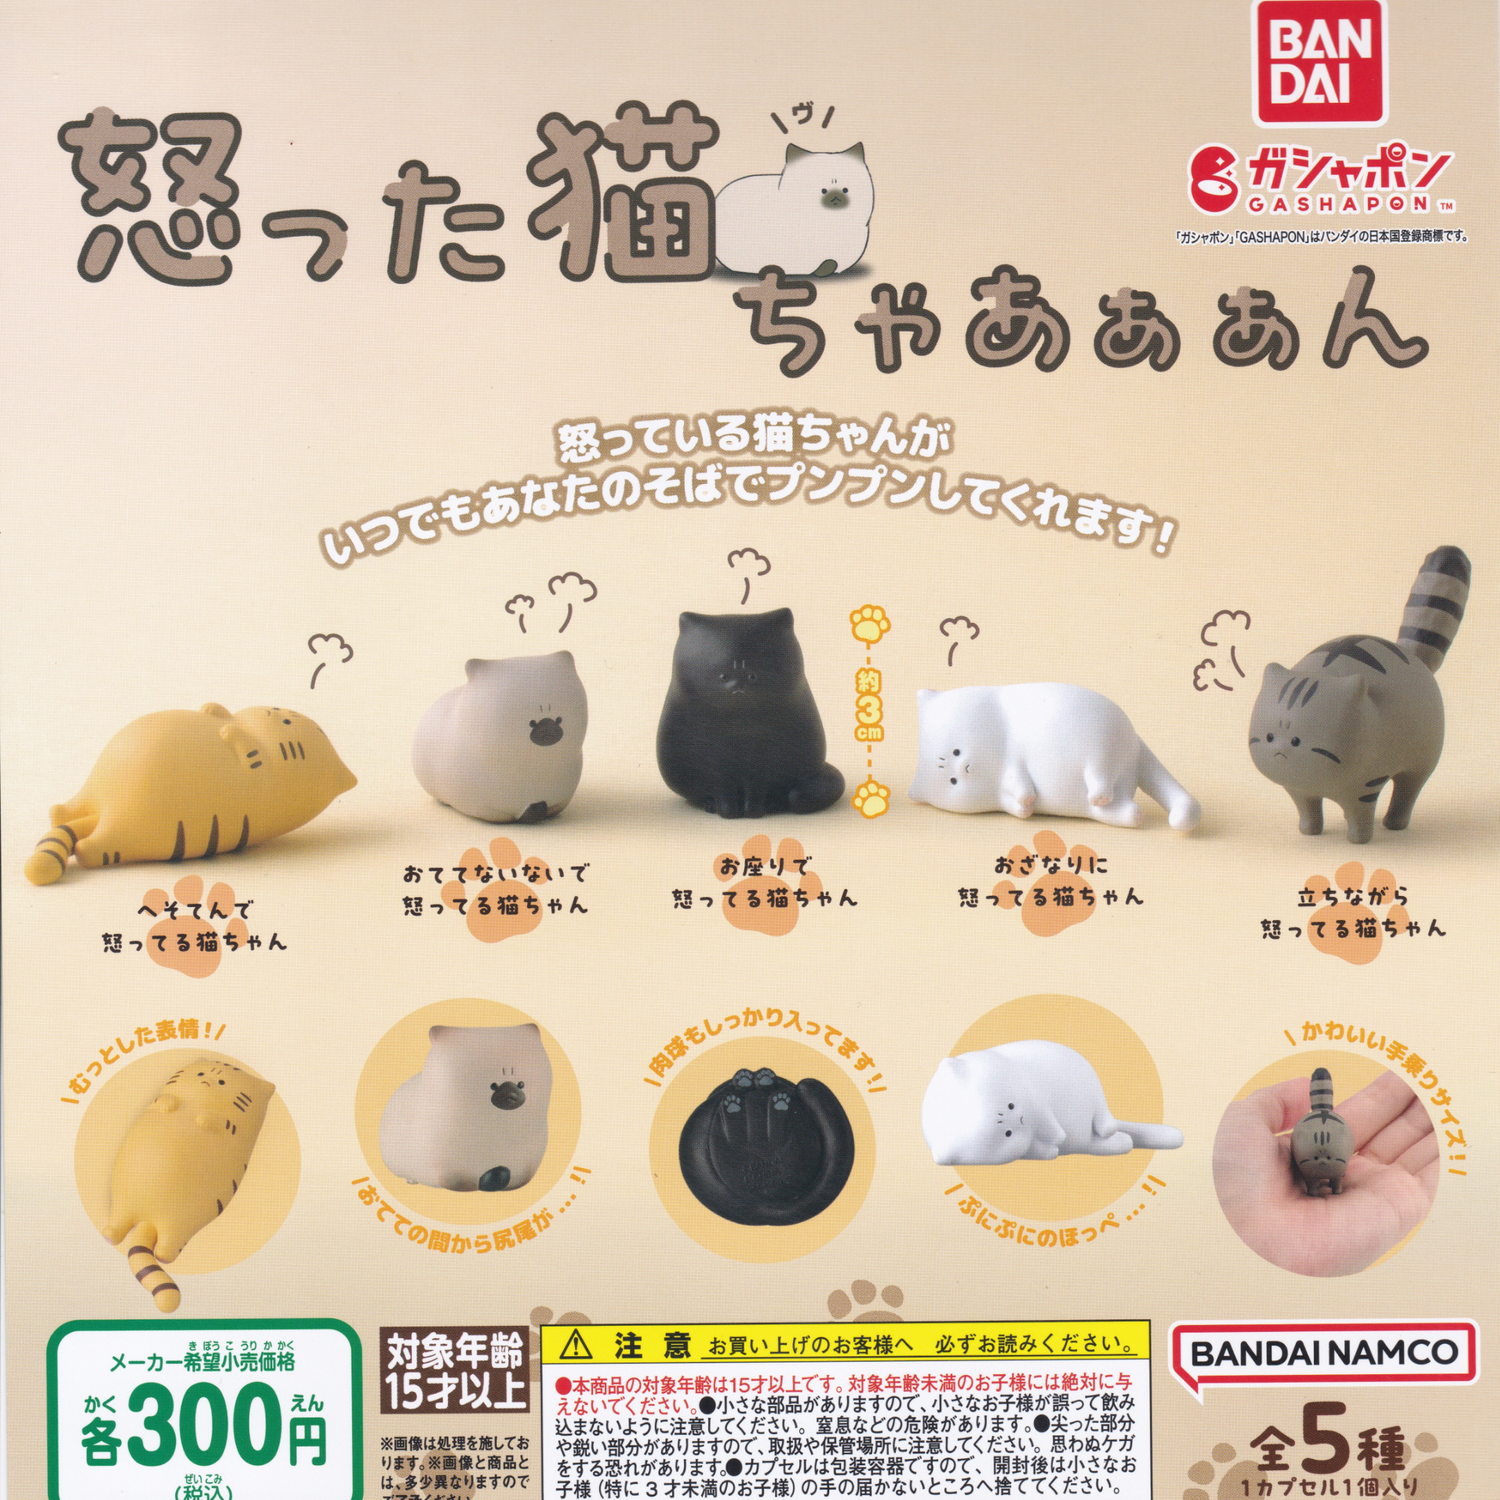 A flyer showing the five versions of angry cat figurines in this collection in Japanese.